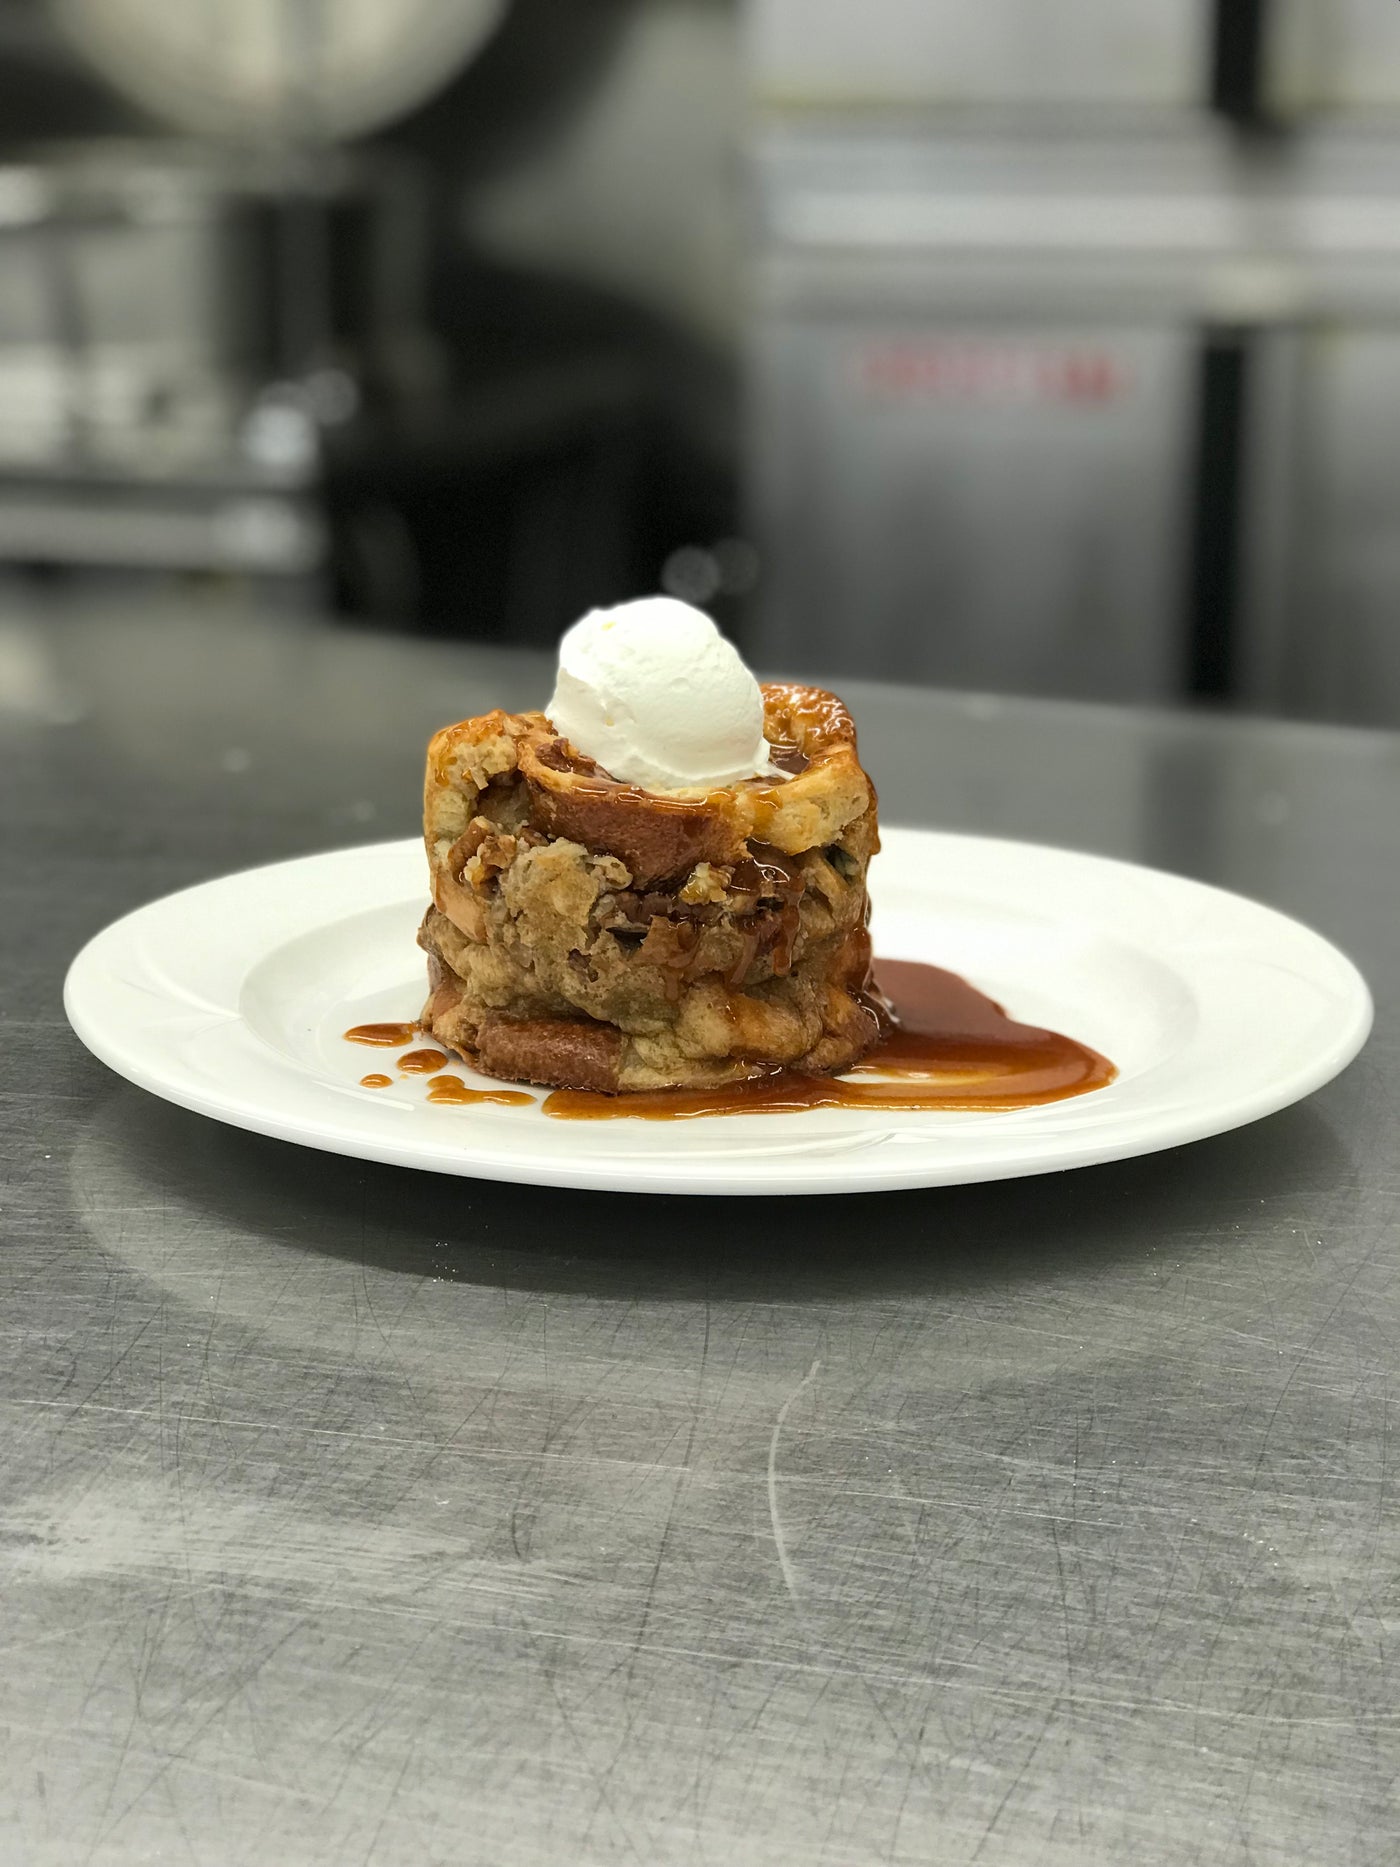 Seeing this wonderful bread pudding will make your mouth water